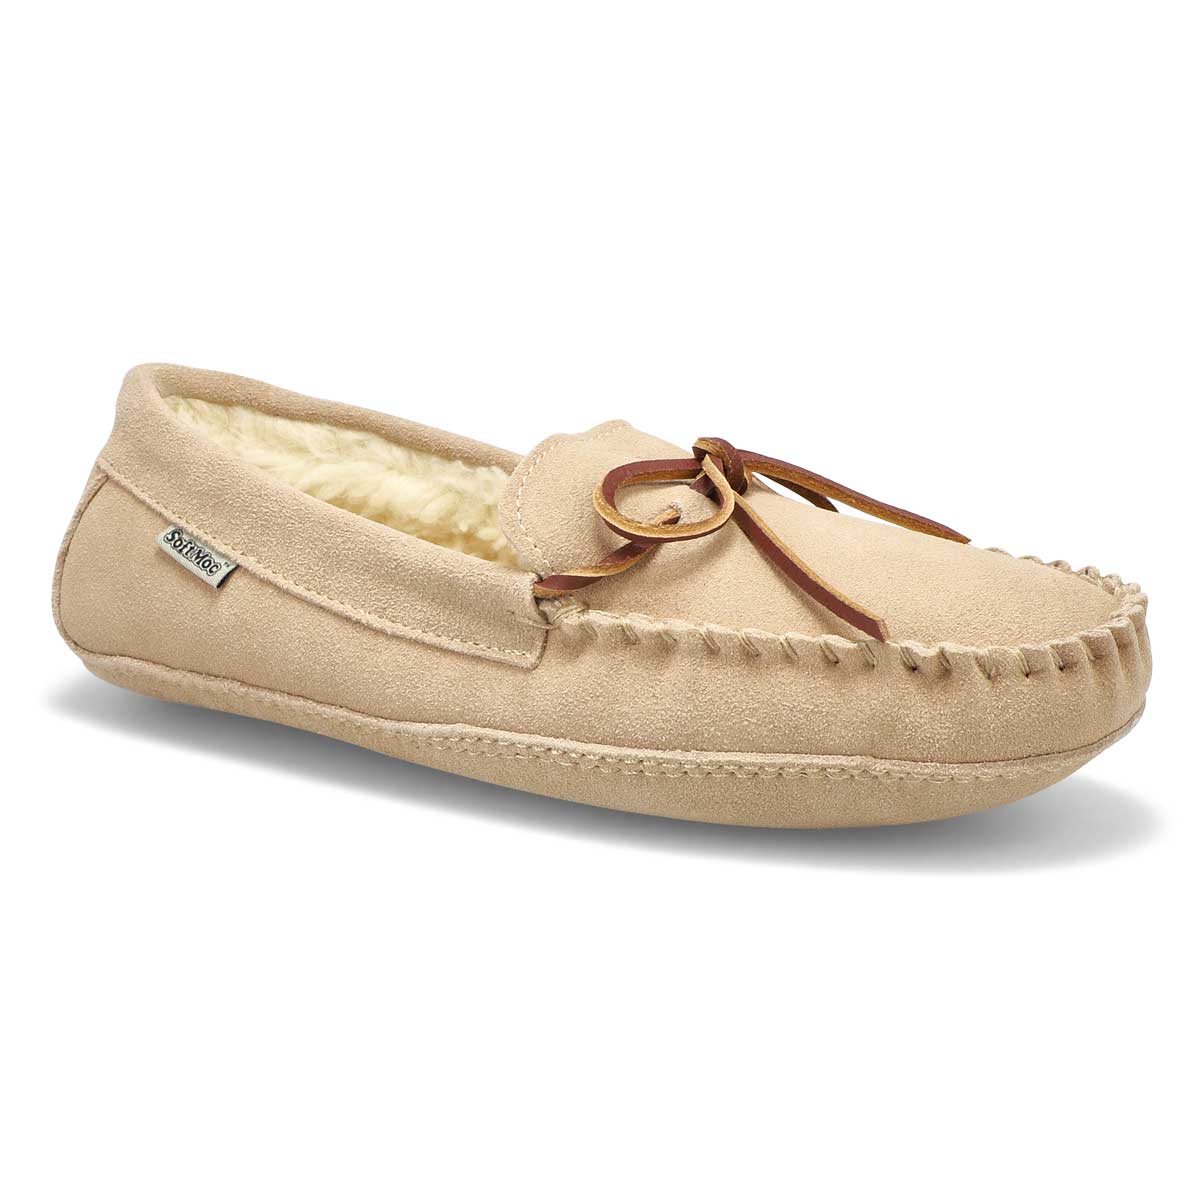 SoftMoc Men's Ace Fur Lined Moccasin - Sand | SoftMoc.com